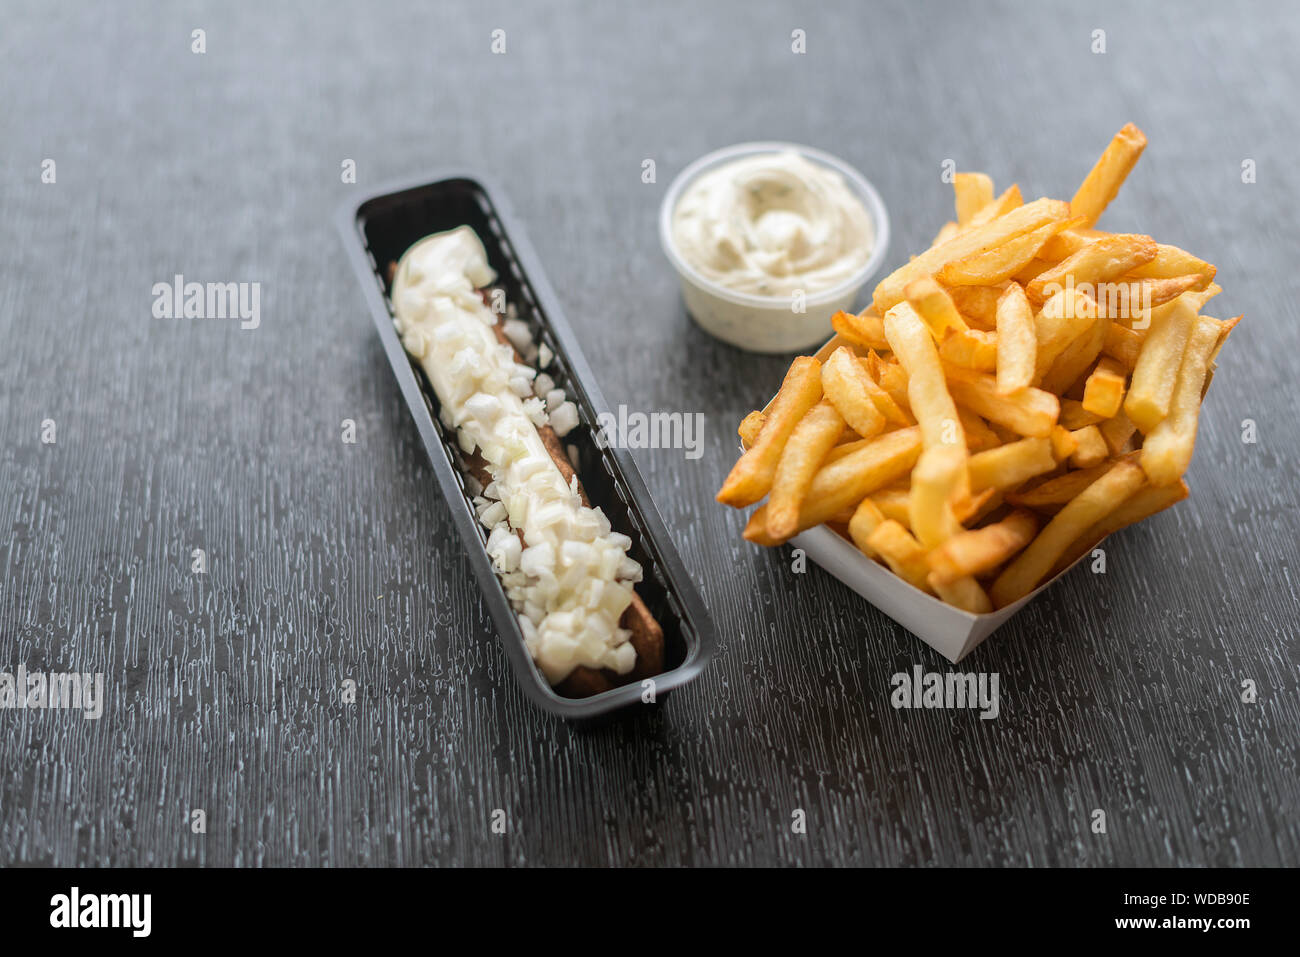 Frikandel with sauce and french fries. Horizontal image. Top view. Stock Photo